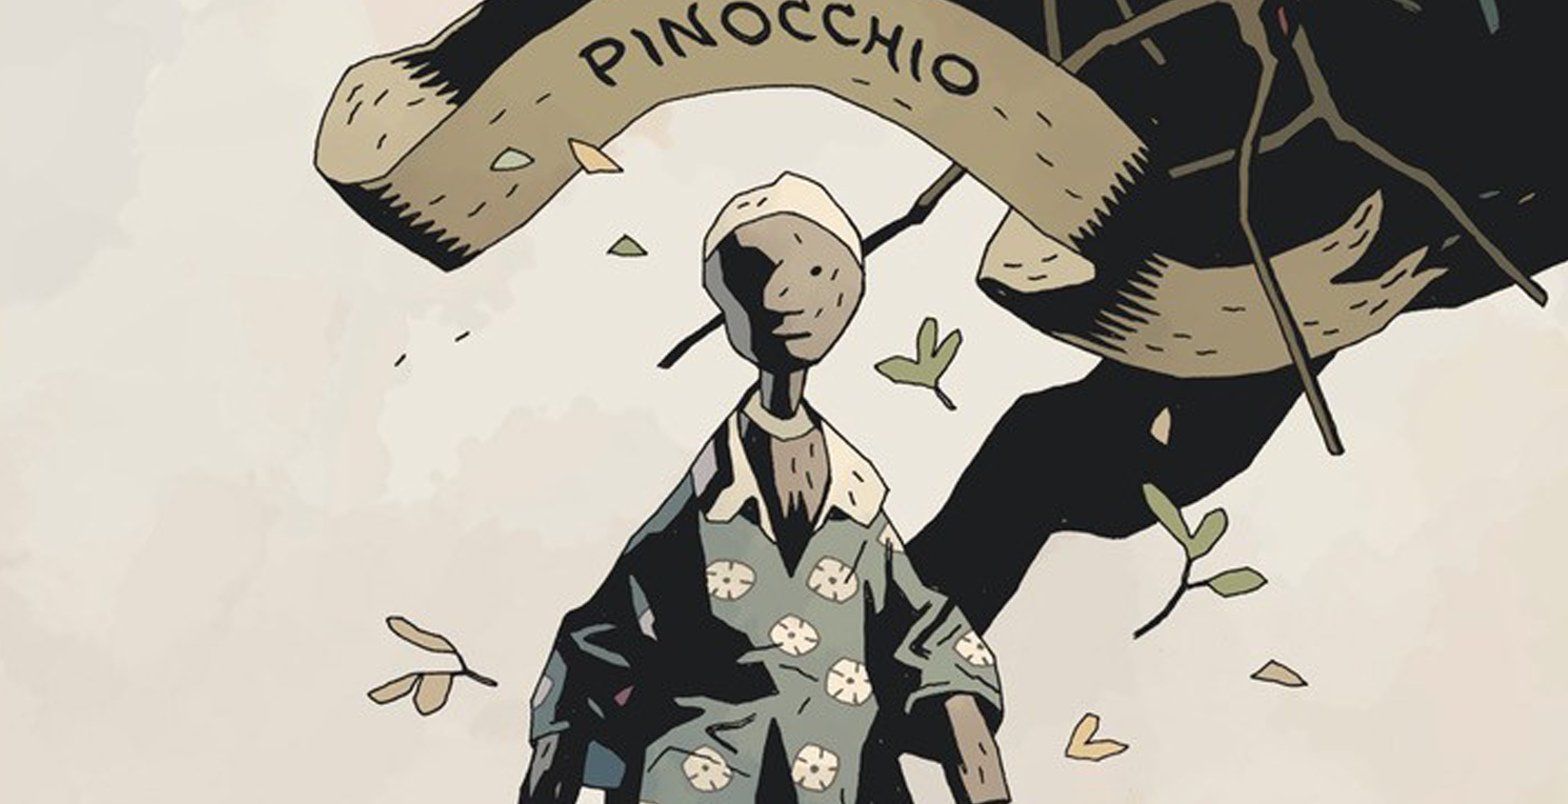 Get ready for a new take on a classic tale, from a comics legend. (Image: Mike Mignola and Dave Stewart/Beehive Books)